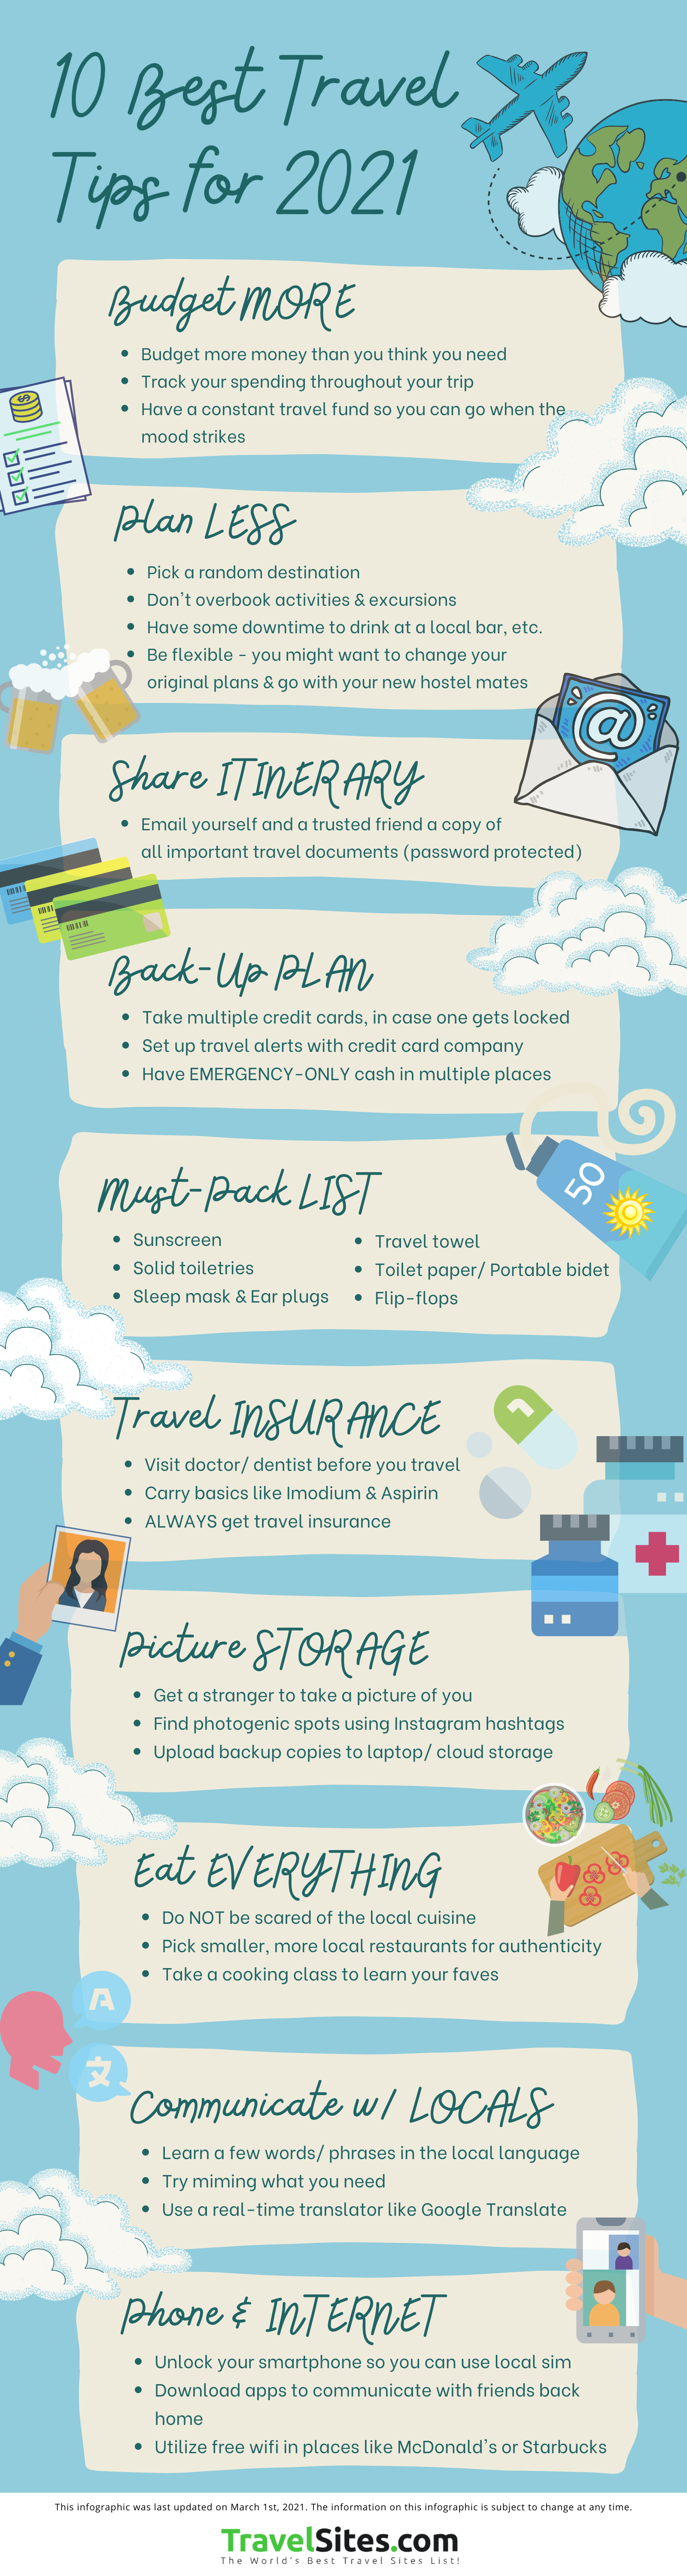 Useful Travel Tips from a Master Traveler